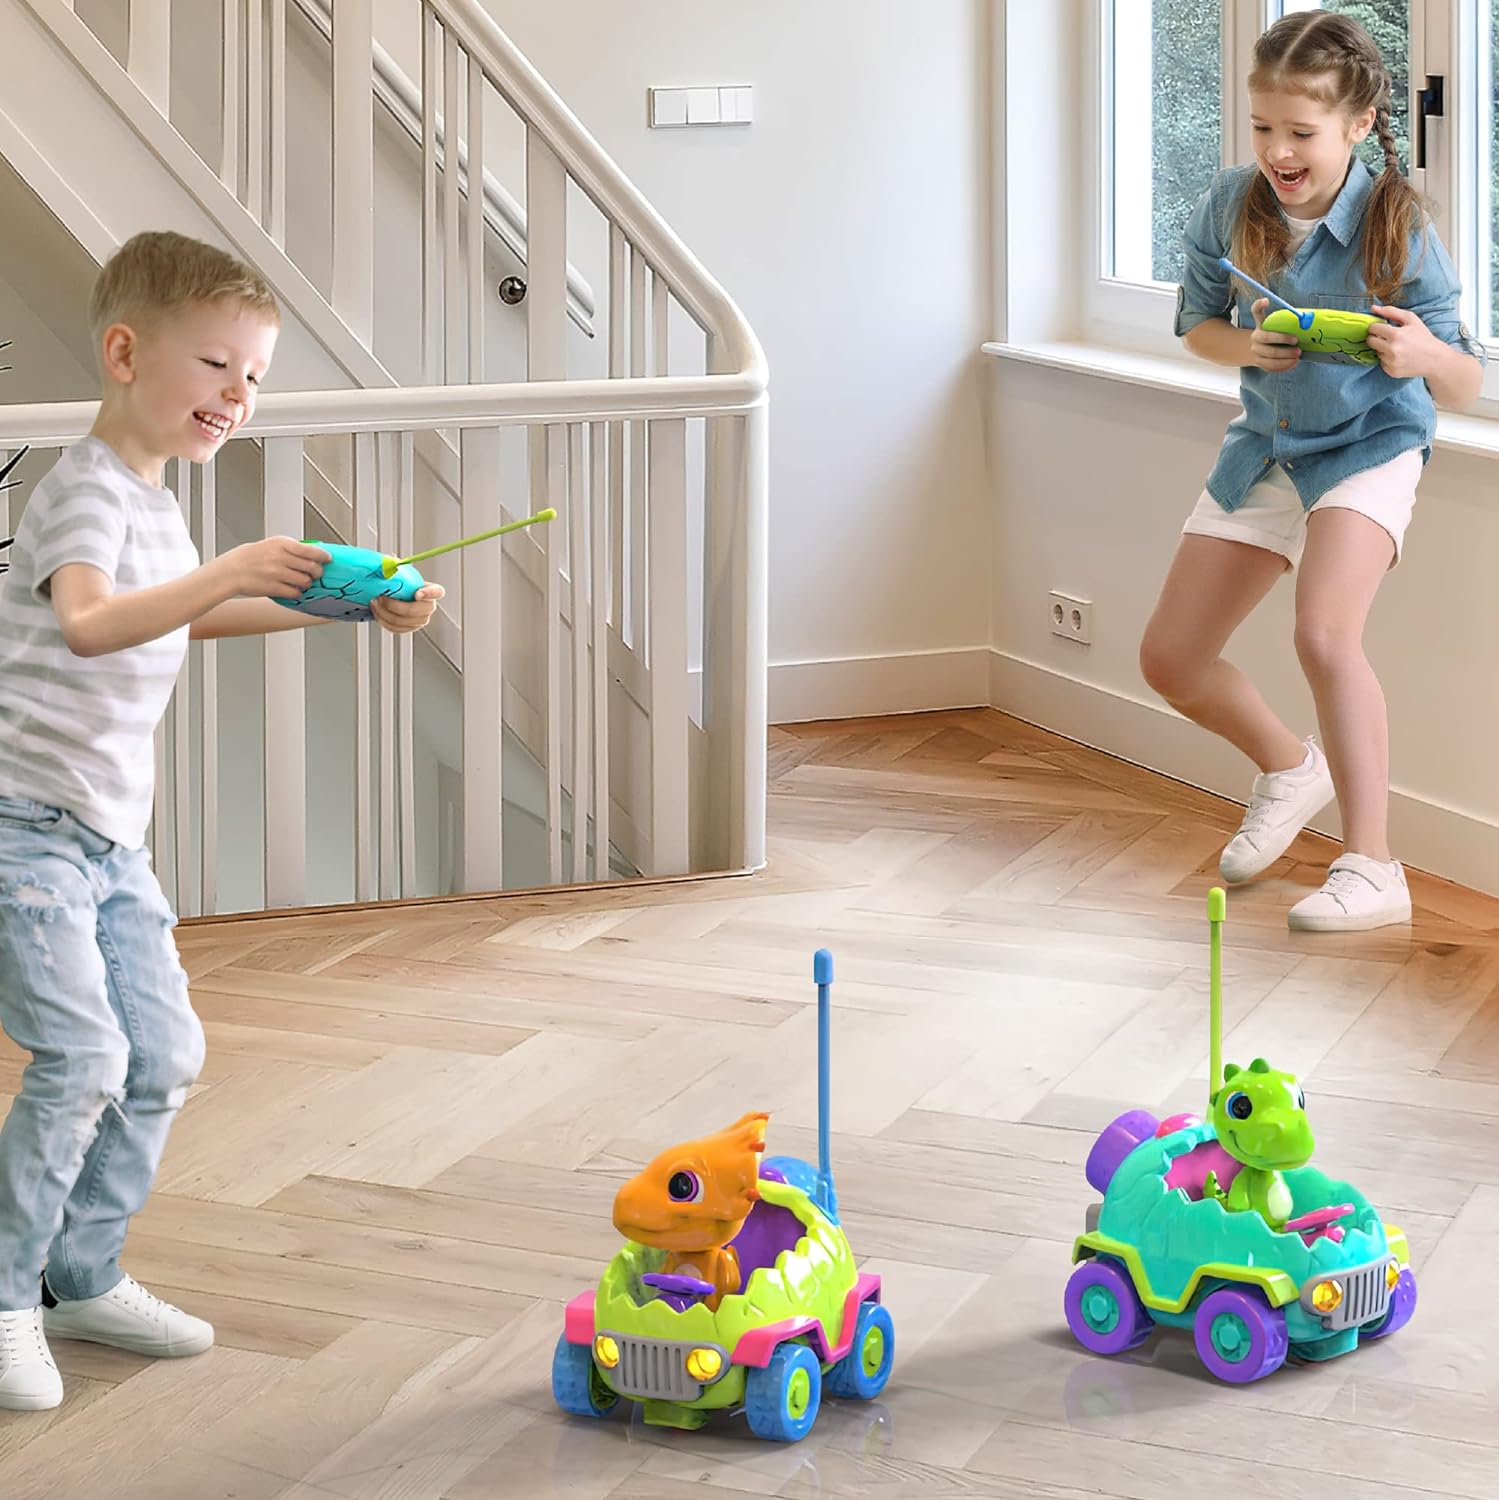 MindSprout Dino Chasers Set of 2 Remote Control Car for Toddler, Kids Toys Age 2 3 4 5, Boys  Girls Birthday Gift, Dinosaur Toy 2-4, LED Lights  Music